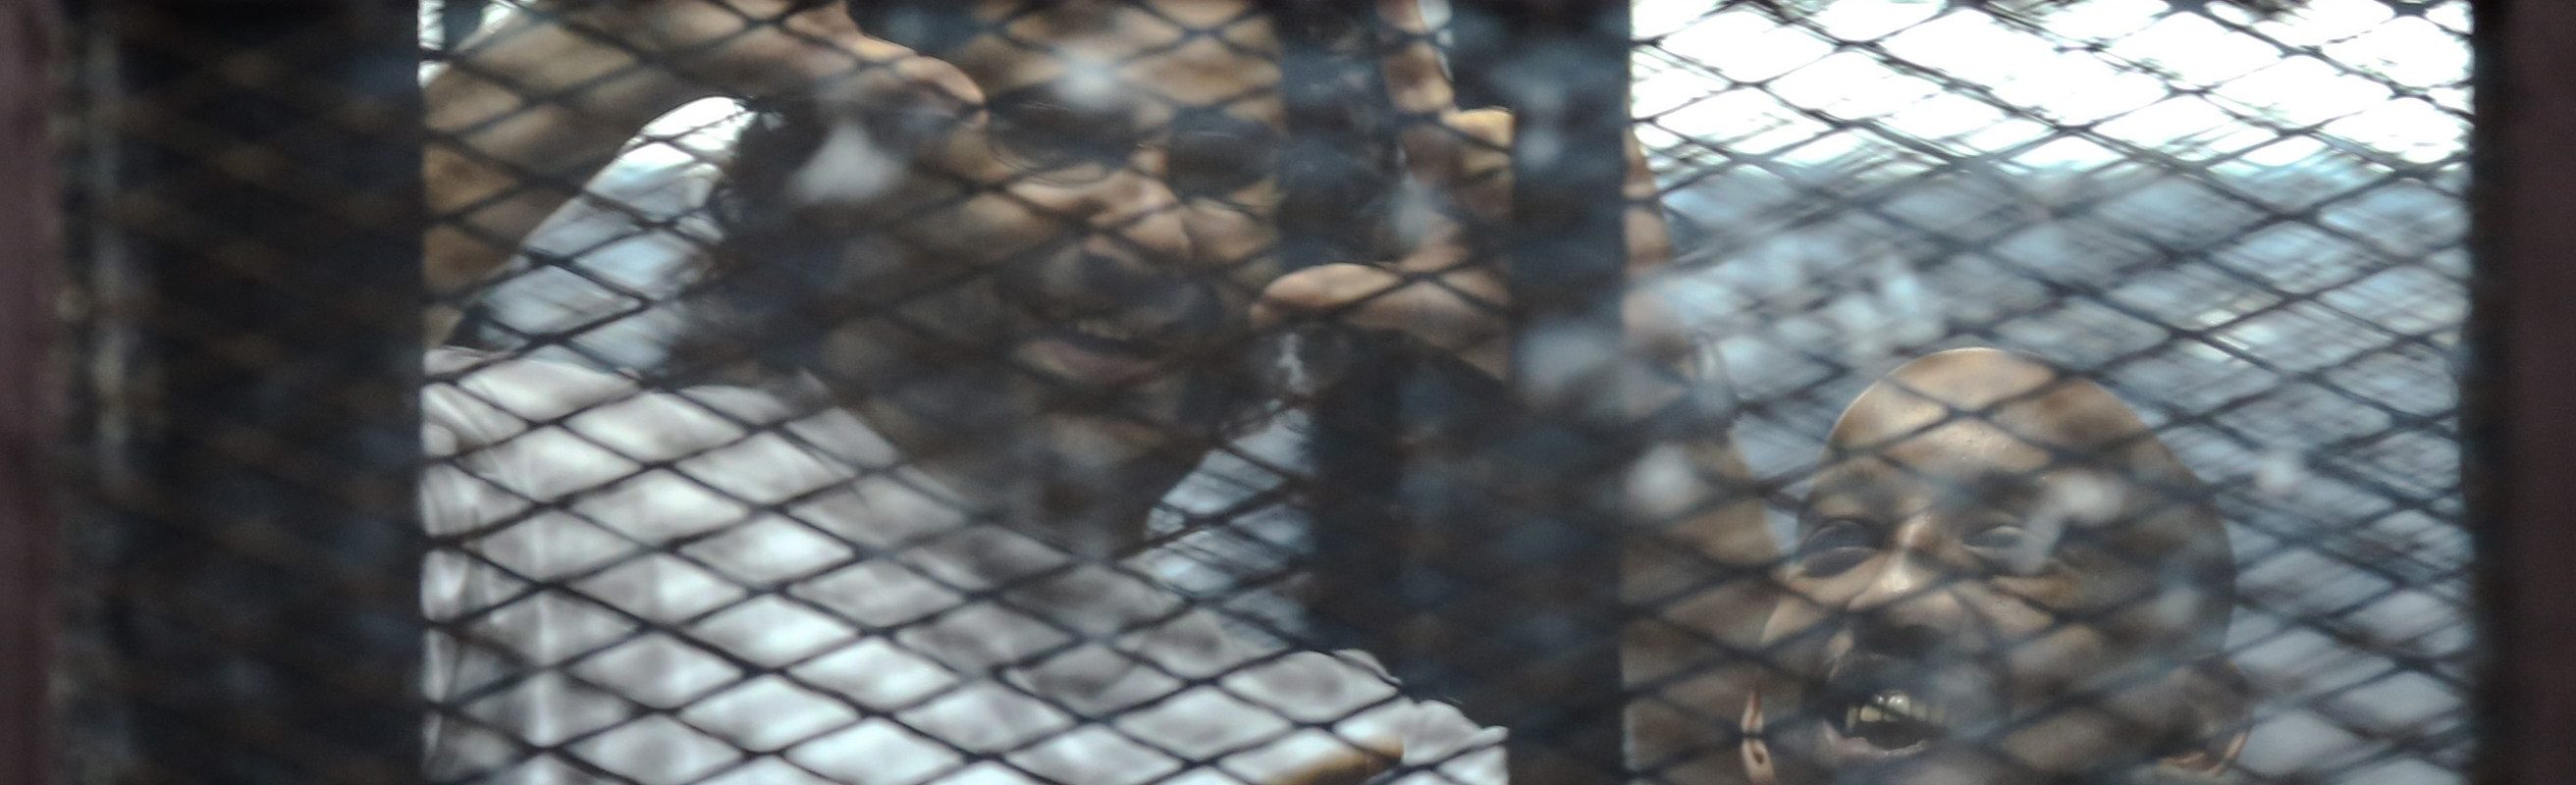 Prominent Egyptian activist Alaa Abdel Fattah stands behind bars with fellow defendants as they are tried at a court in Cairo on August 6, 2014.